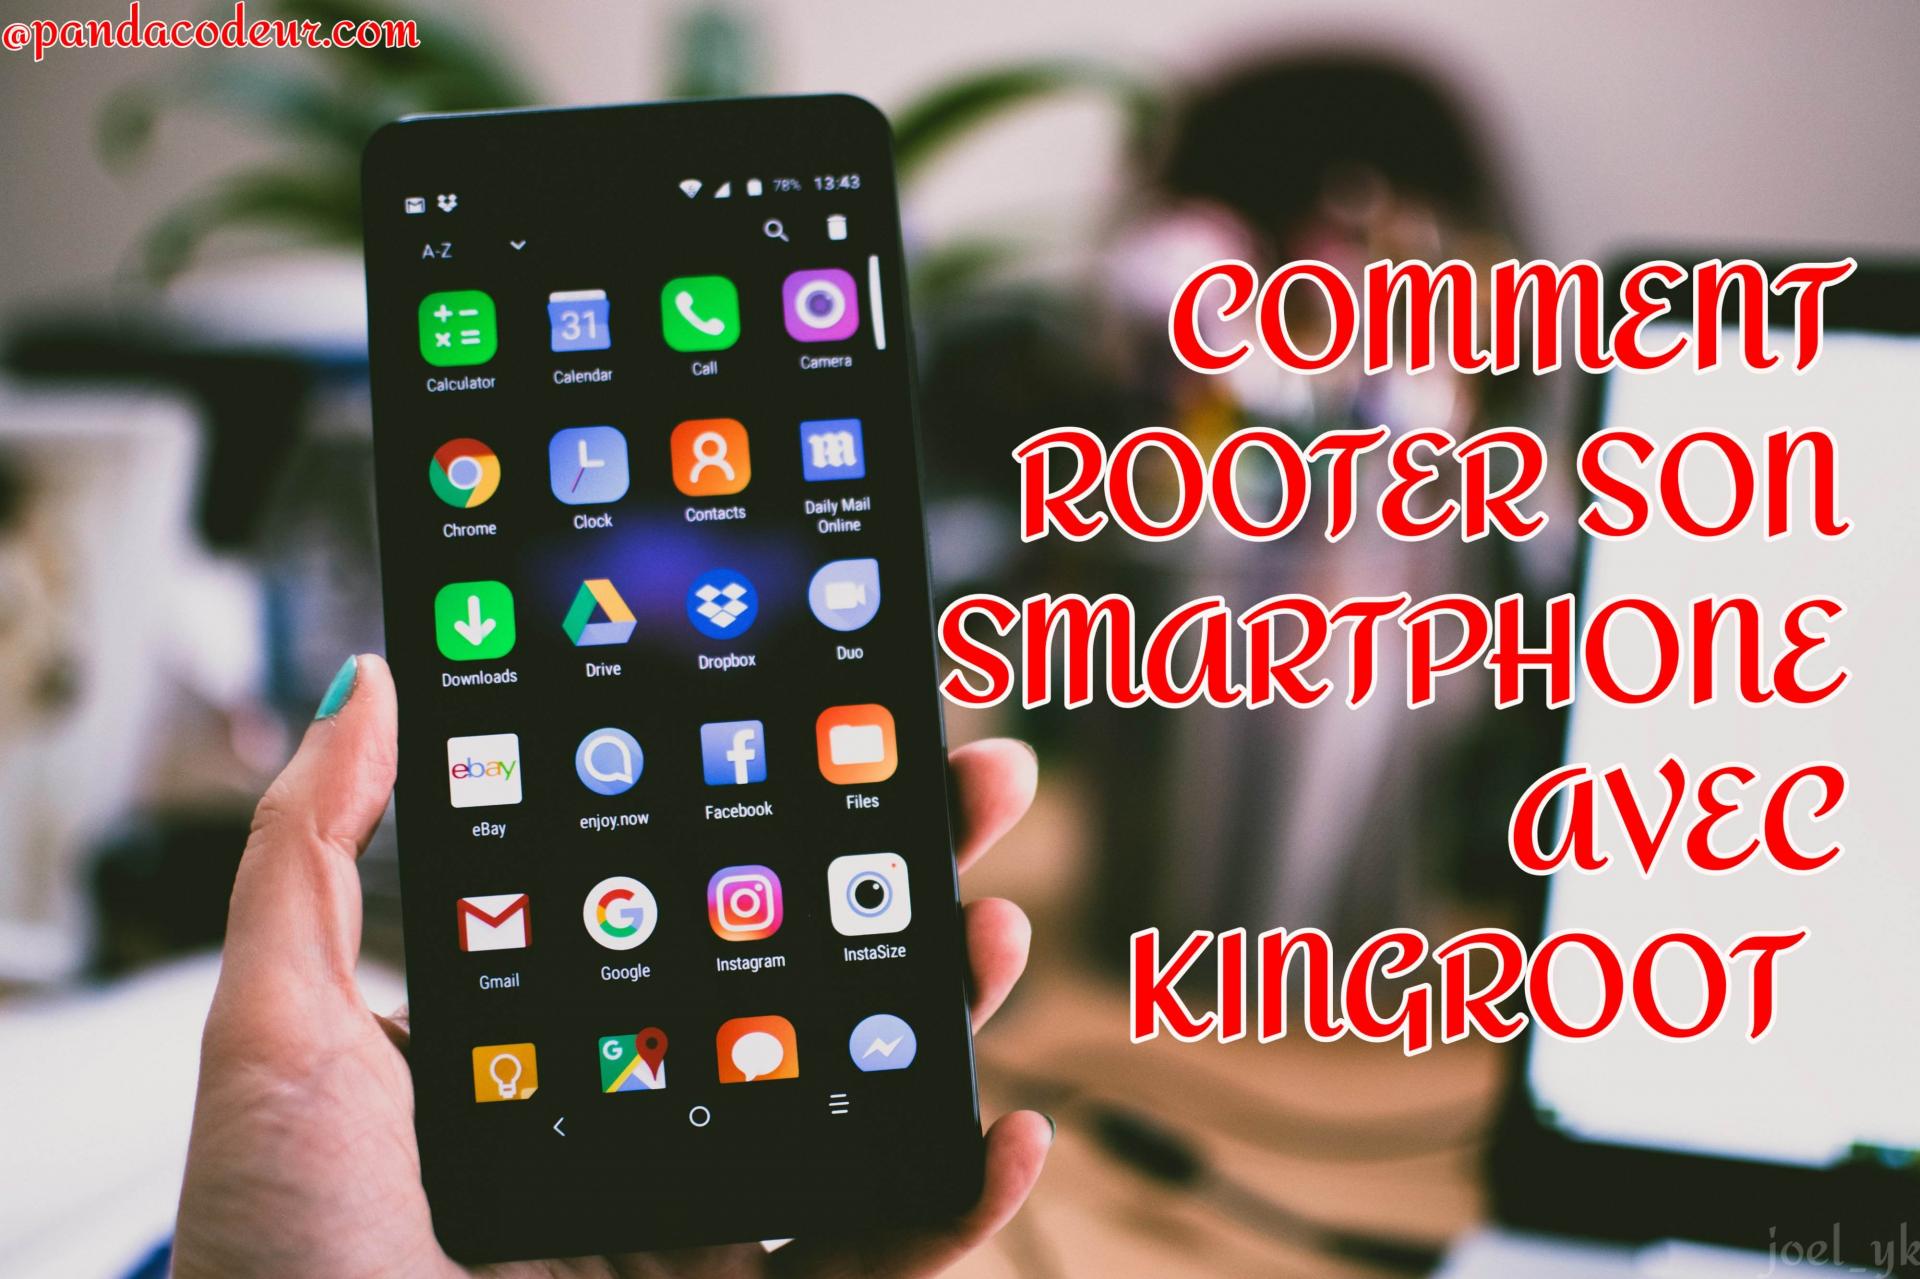 Pandacodeur comment rooter son smartphone avec kingroot 2 1